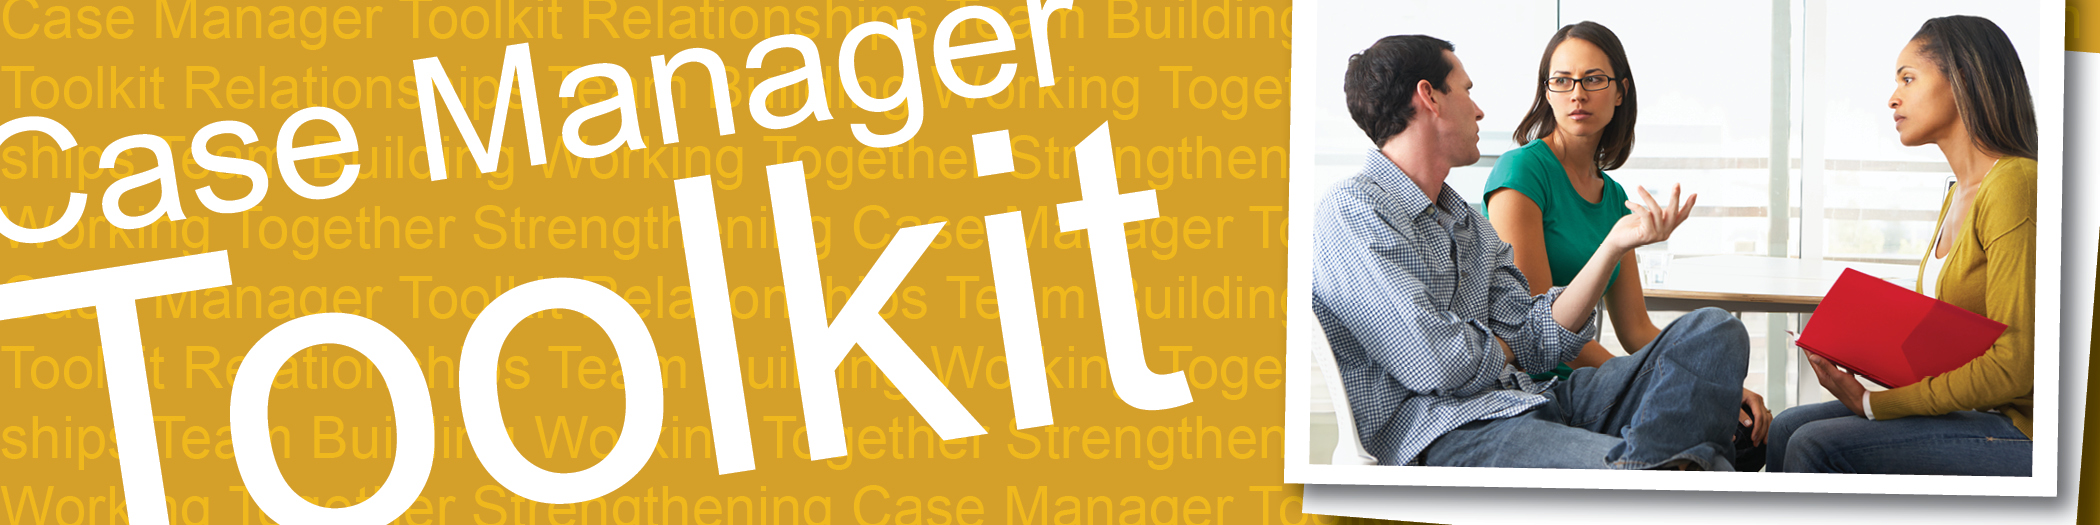 Case Manager toolkit